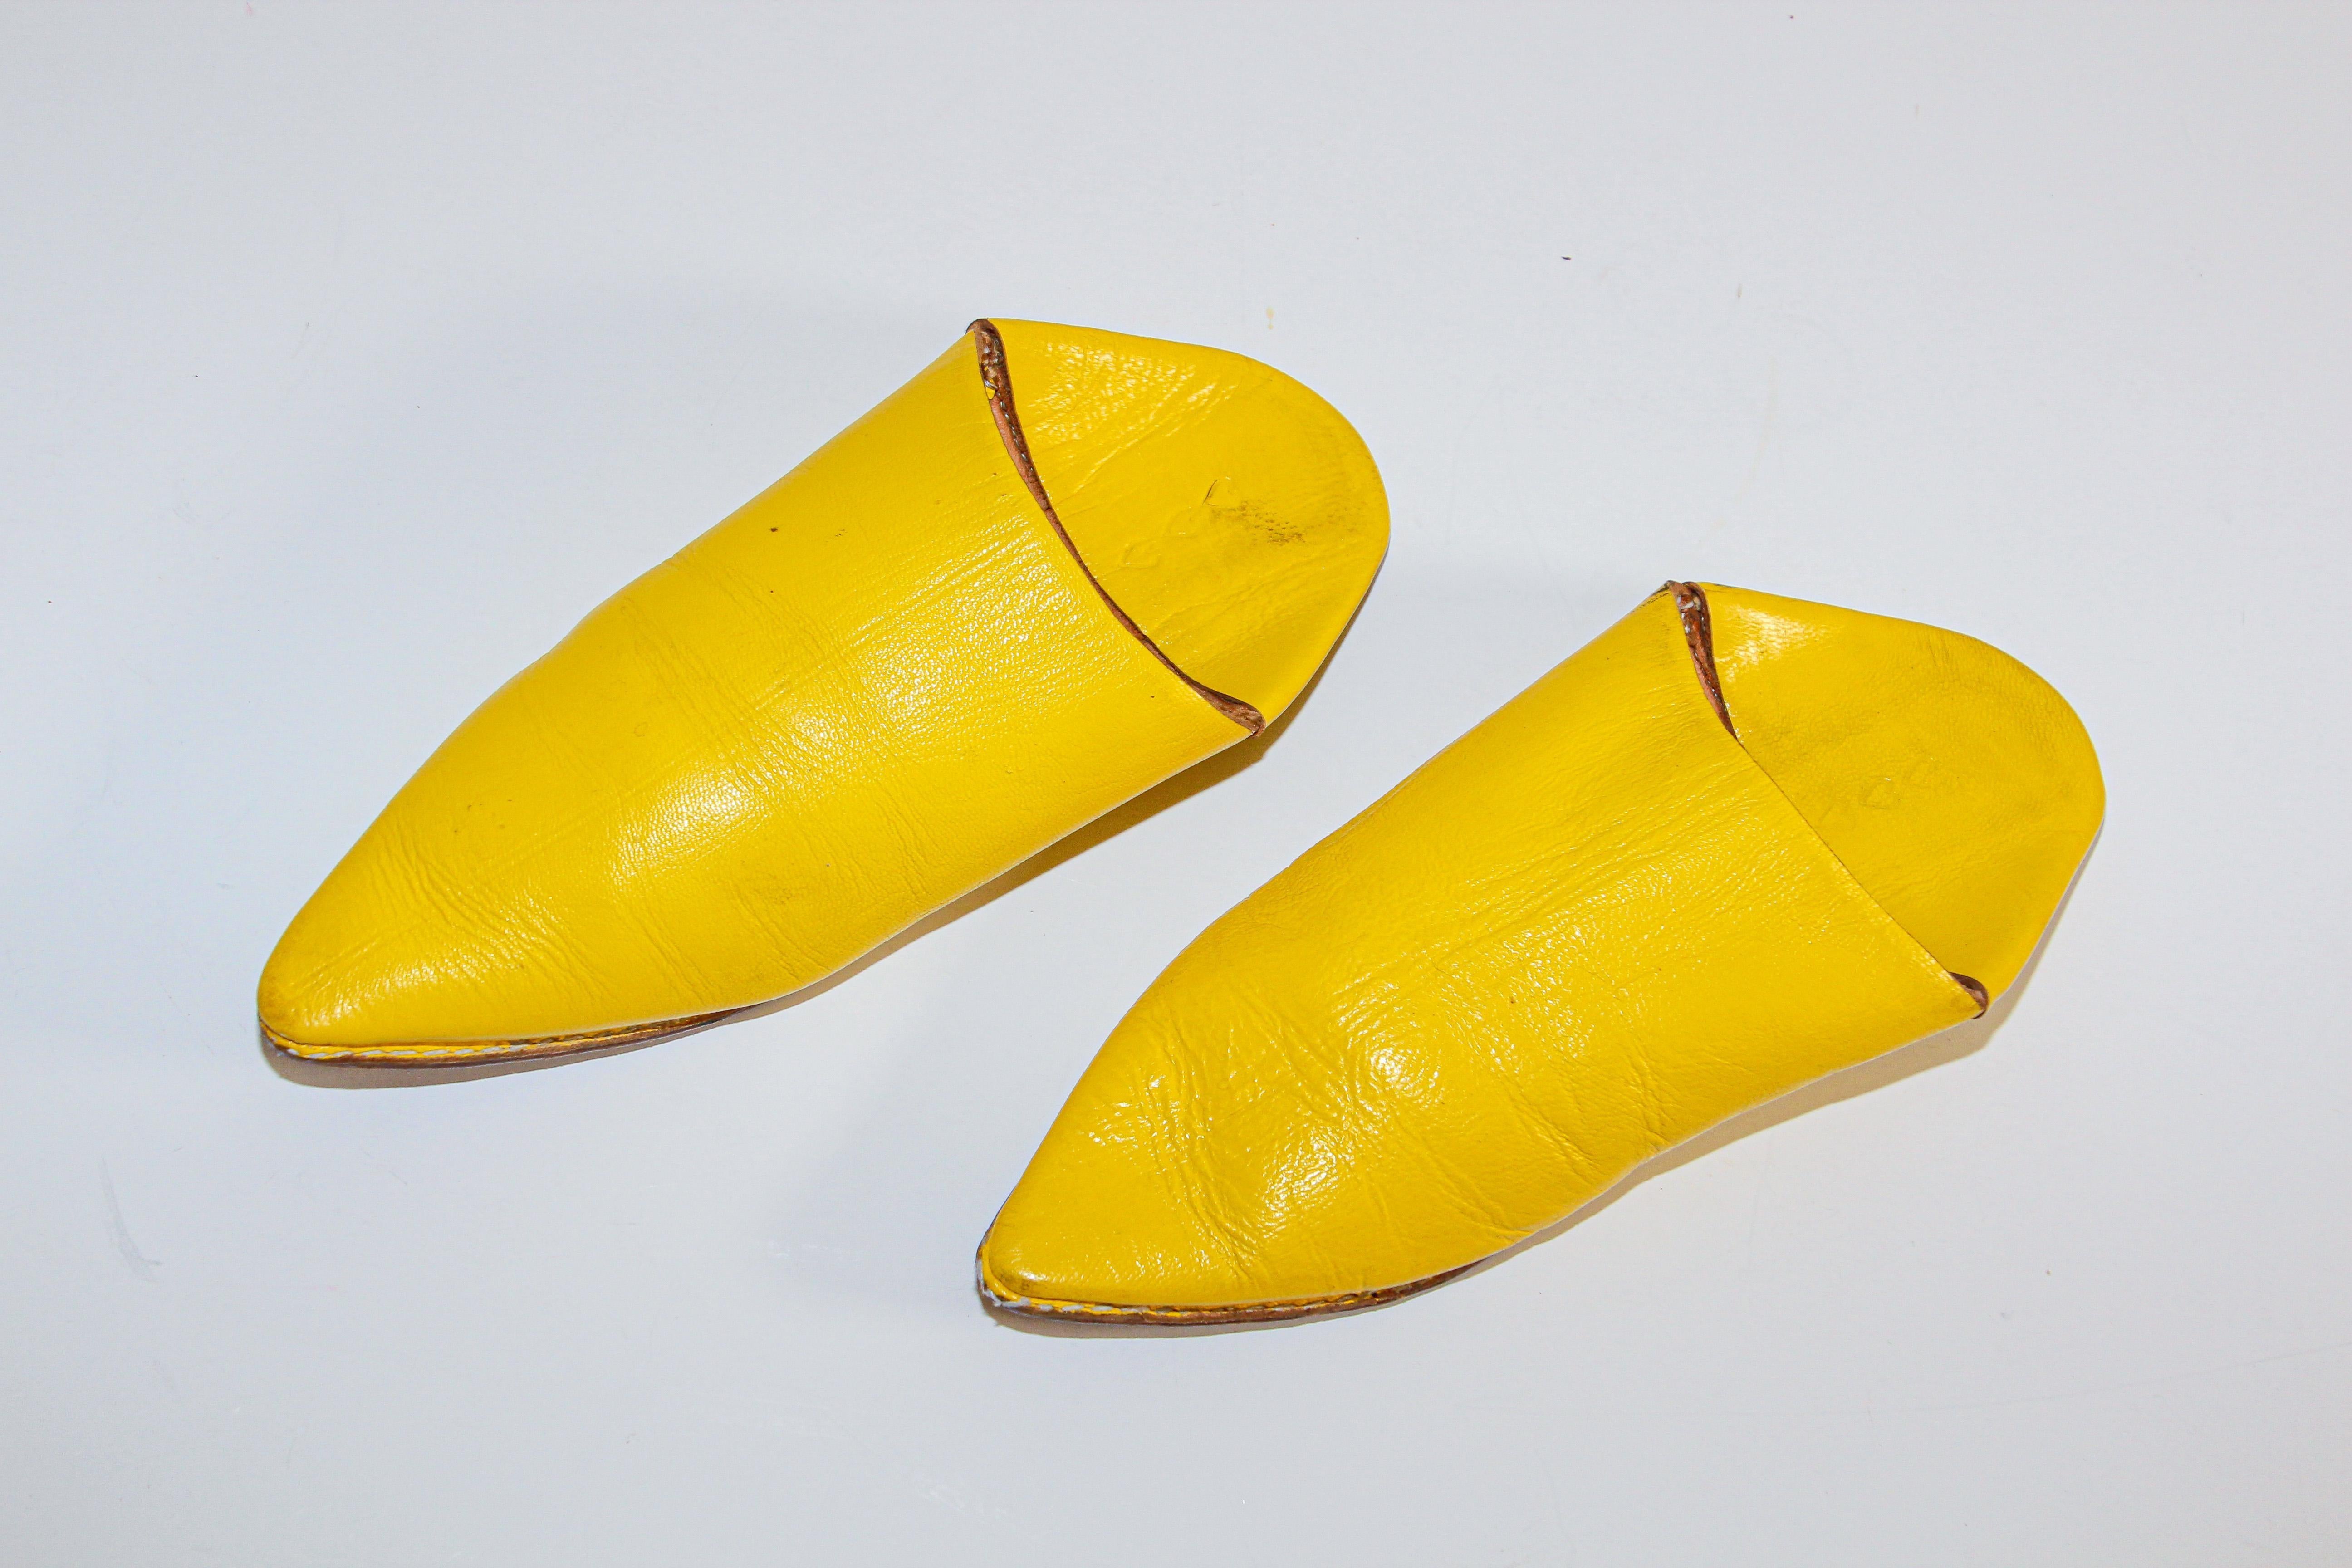 Moroccan yellow leather slippers are handmade to perfection the inside sole is crafted of soft leather.
Hand-sewn sole and handcrafted in Fez Morocco. 
You won't want to take the Moroccan babouches off your feet.
vintage Moroccan shoes to wear